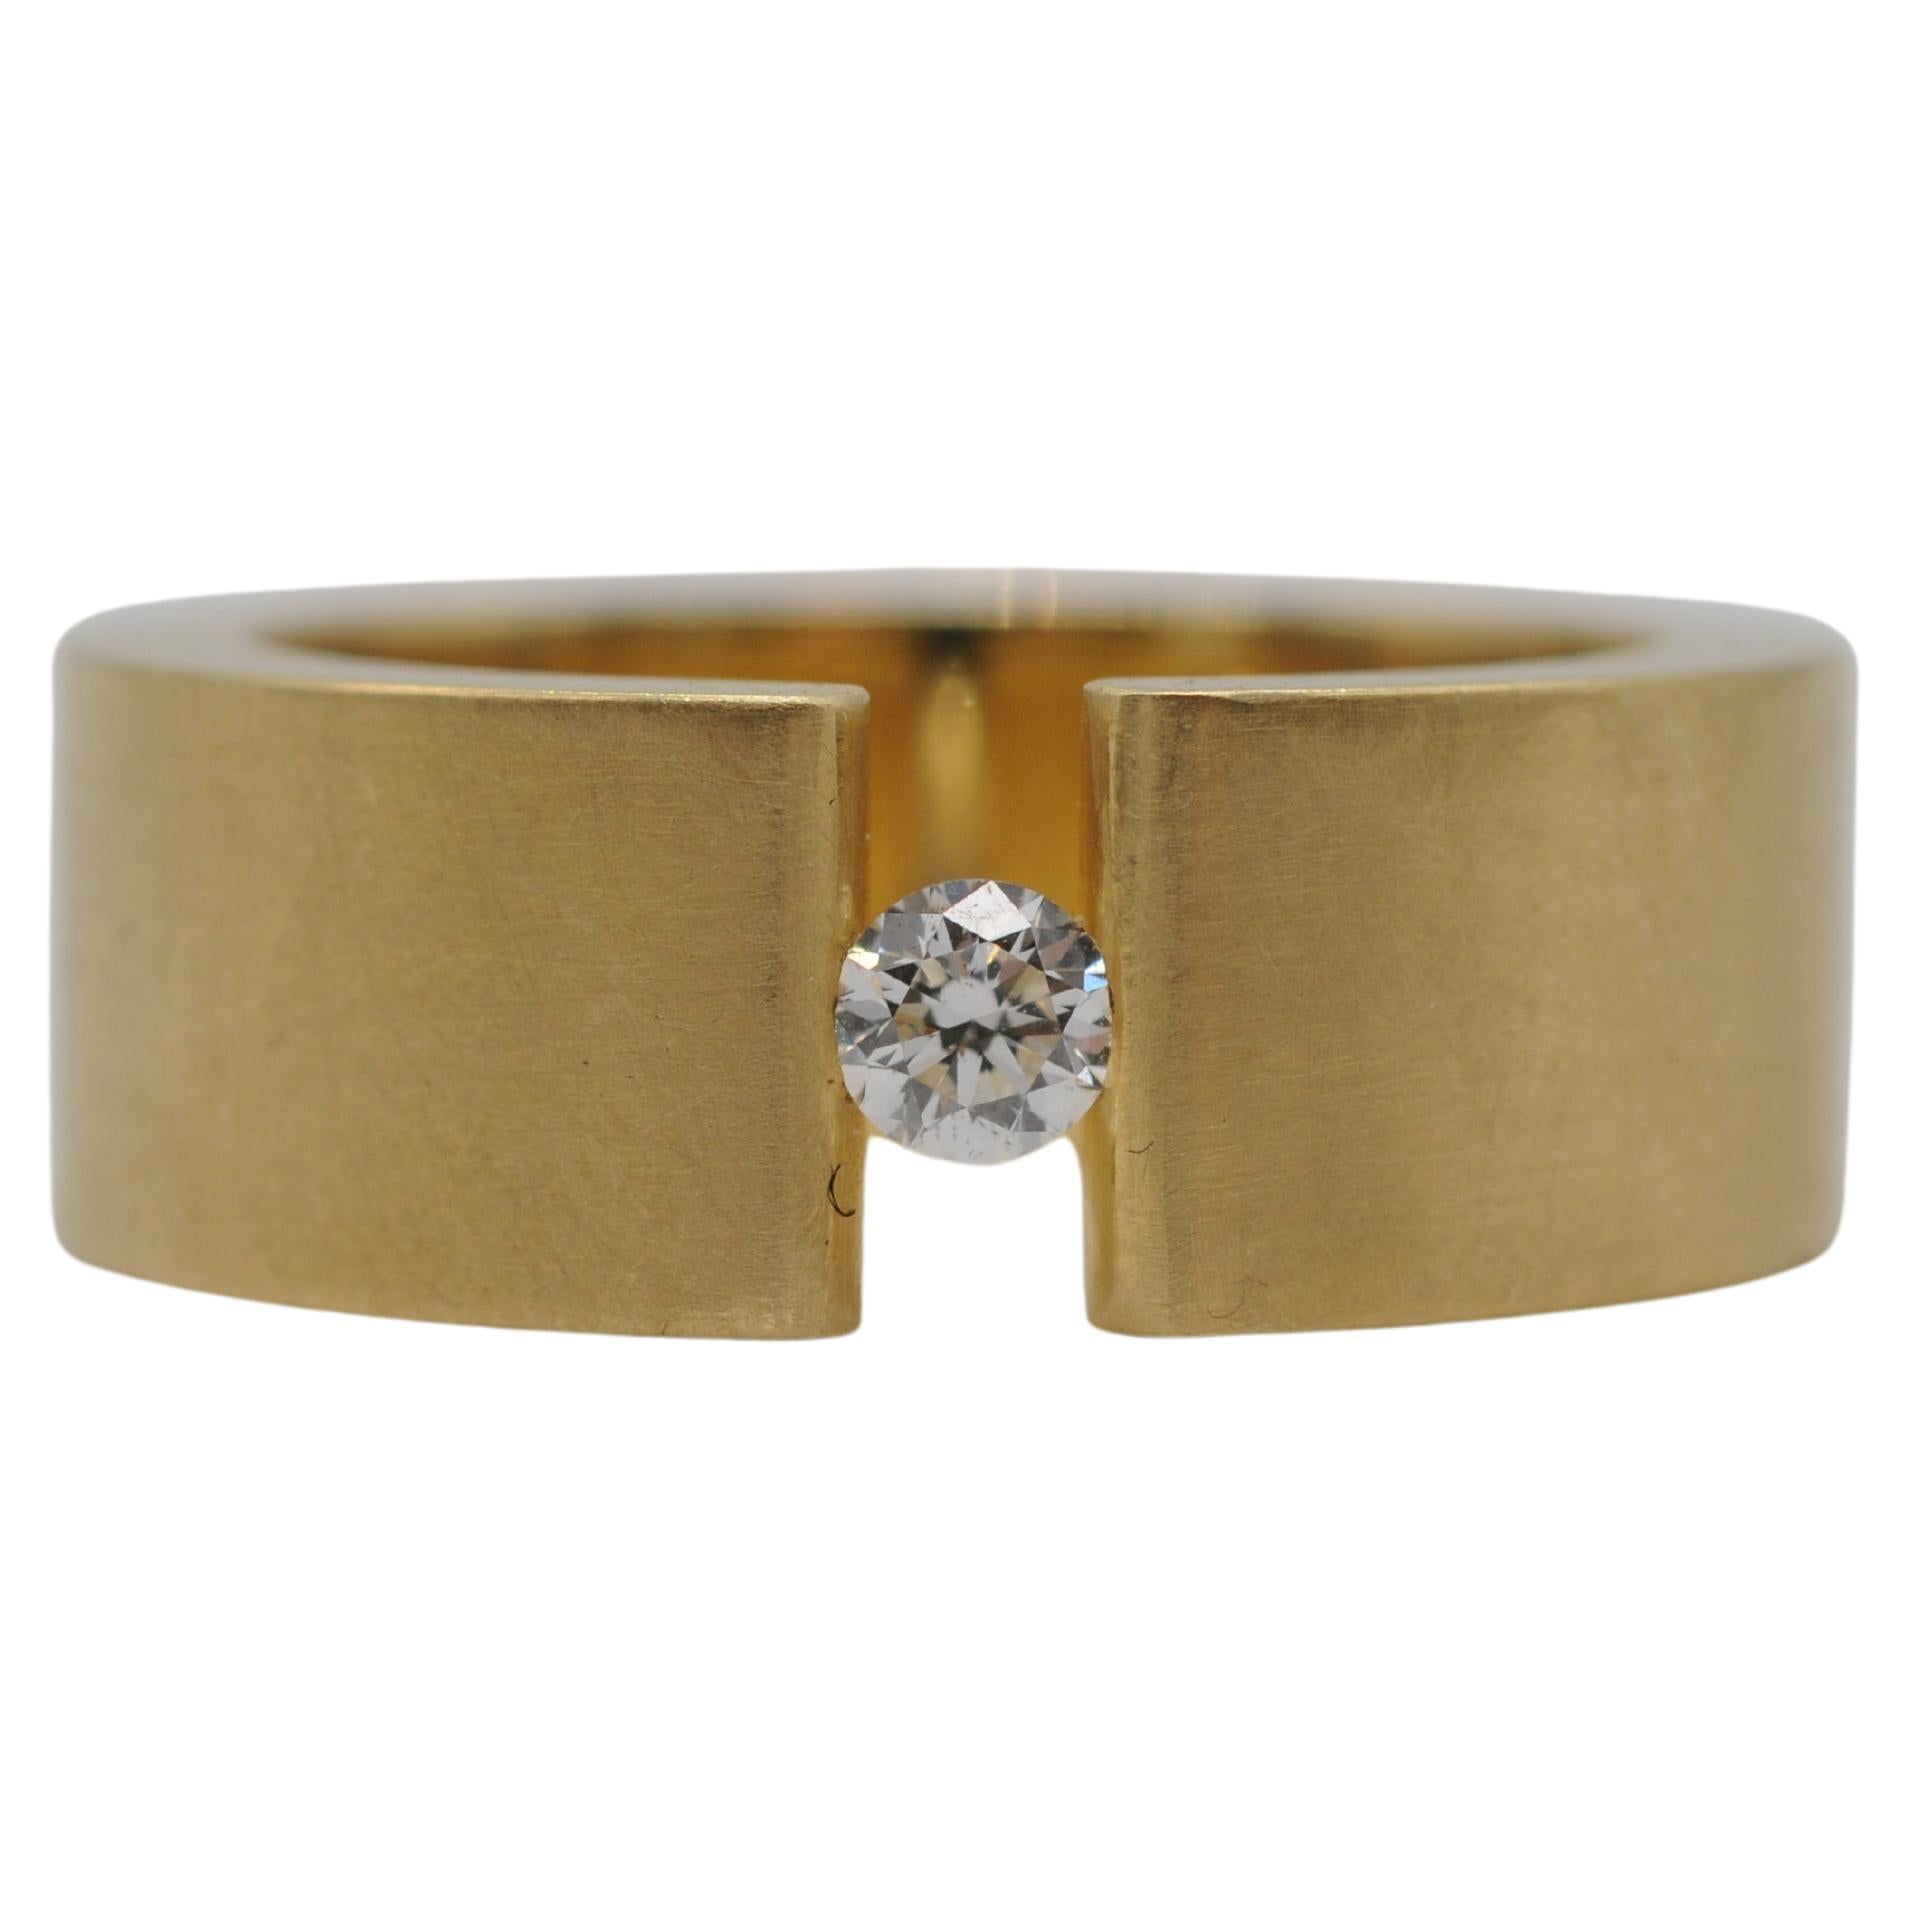 Niessing diamond ring in 18k(750er) yellow gold 

Let's delve into the specifications of this captivating diamond:

Carat Weight: 0.20ct
Clarity: VS2
Color: E
Cut: Very Good

This diamond, with its remarkable clarity, dazzling color, and superior